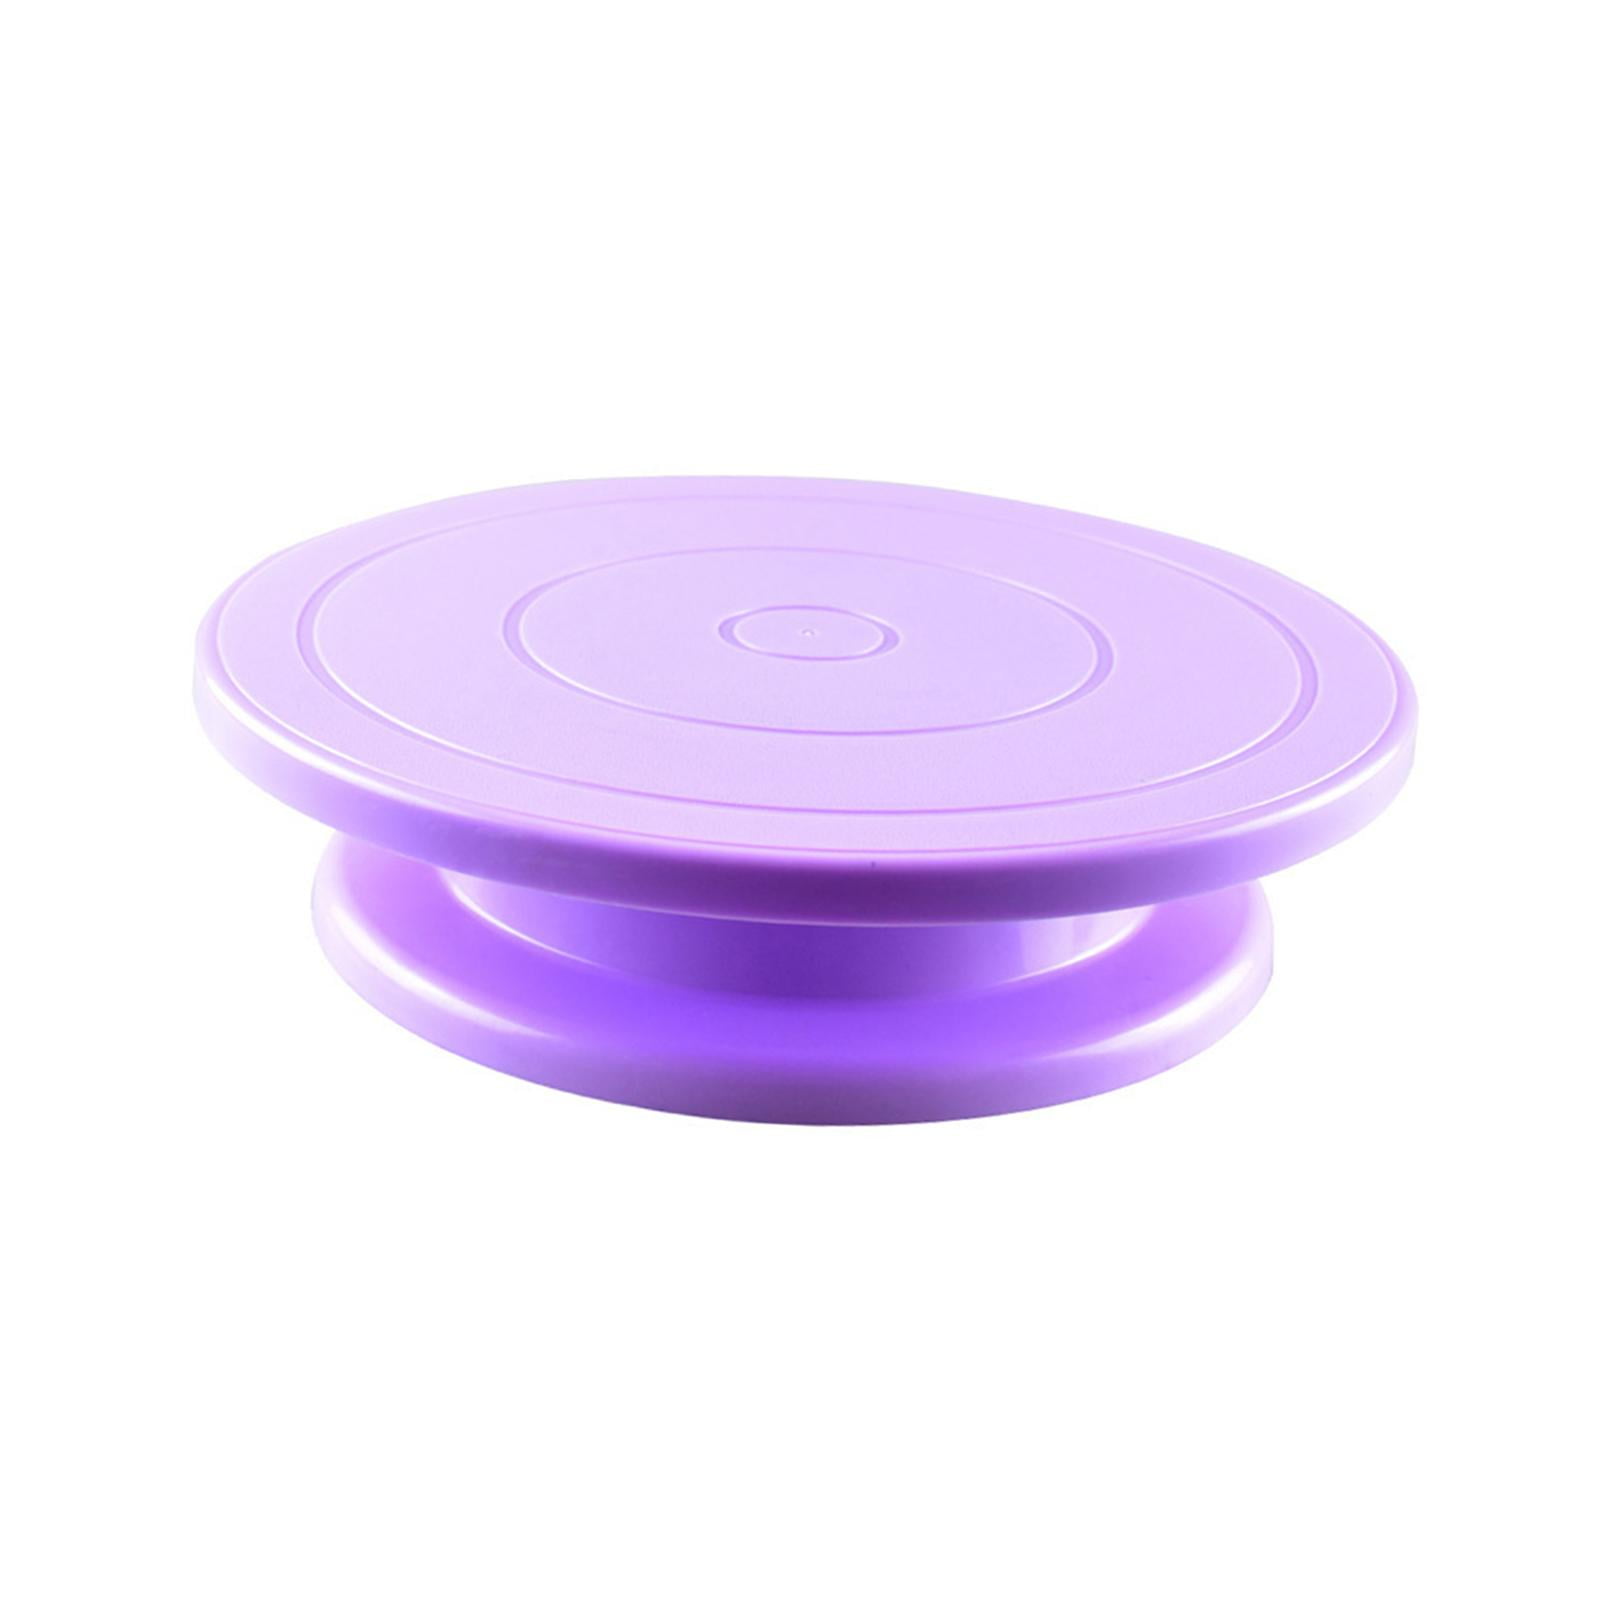 Cake Turntable Rotating Cake Stand Rotate Turn Table Kitchen